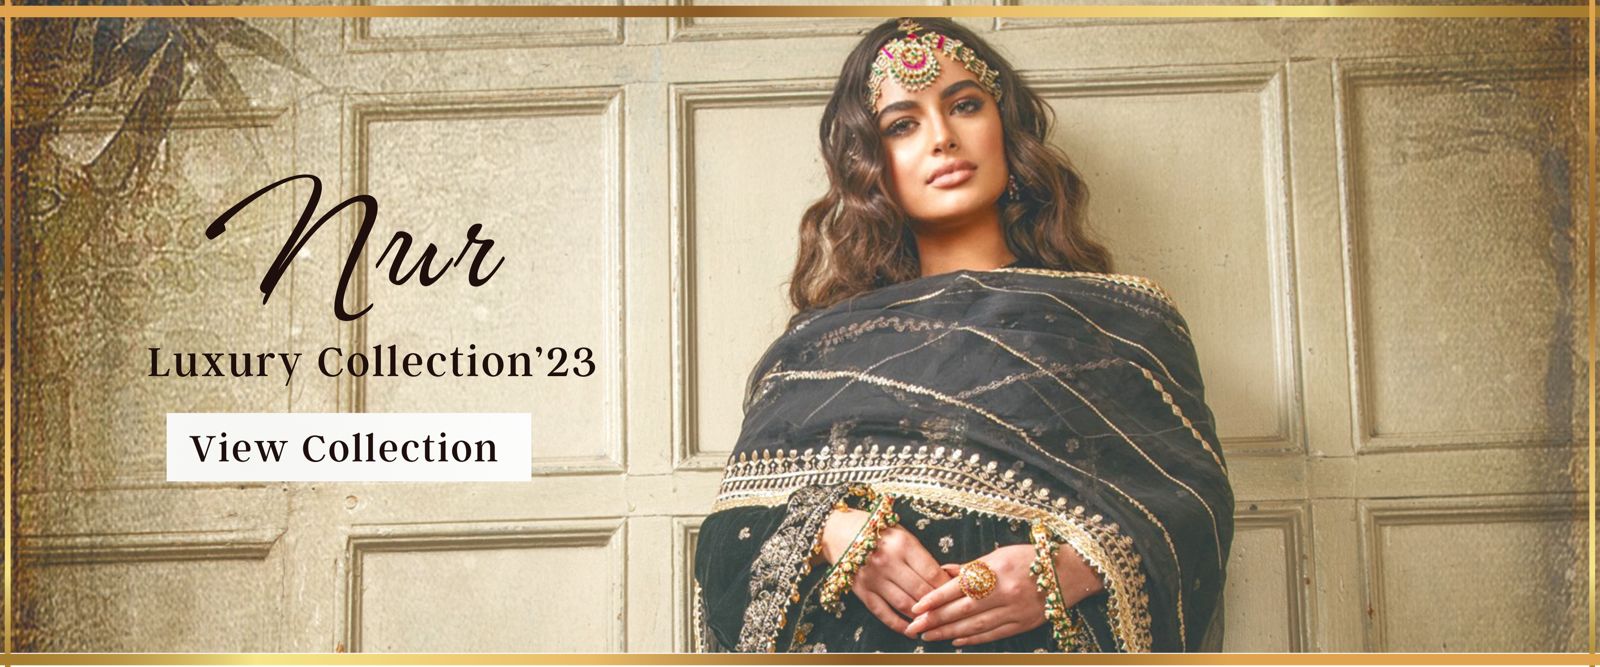 luxury jewellery collection’23 banner